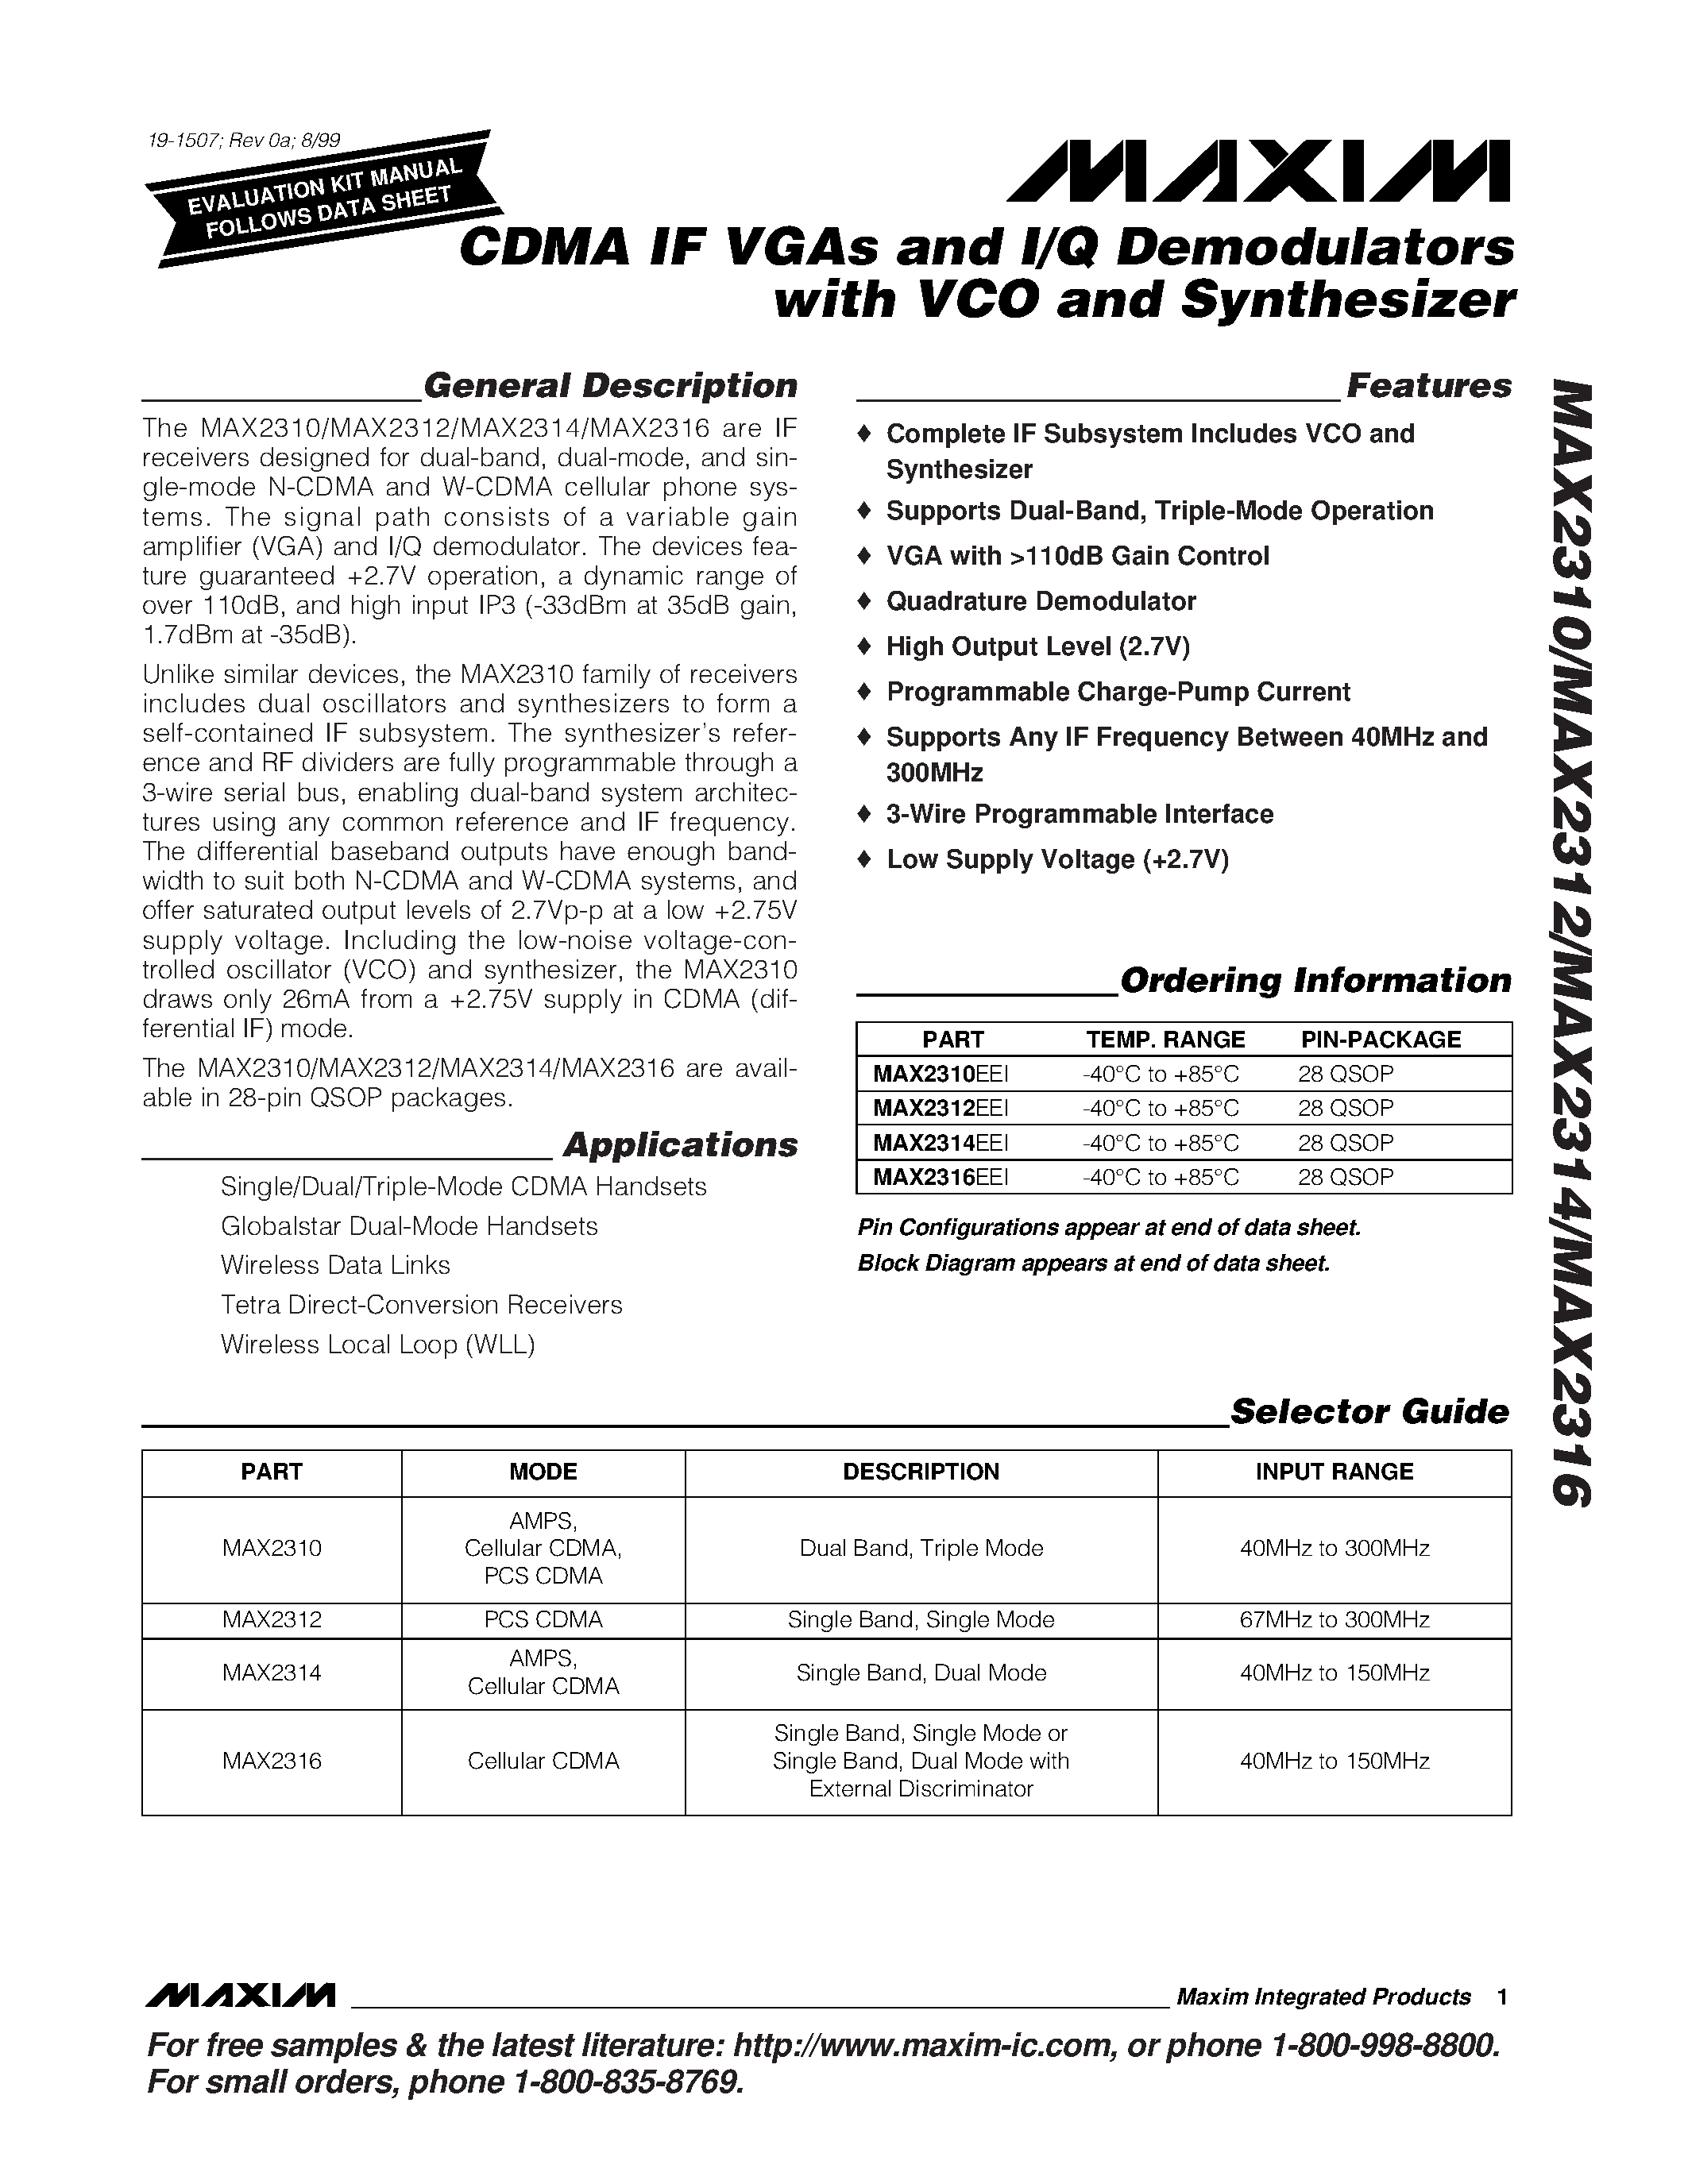 Datasheet MAX2310 - CDMA IF VGAs and I/Q Demodulators with VCO and Synthesizer page 1